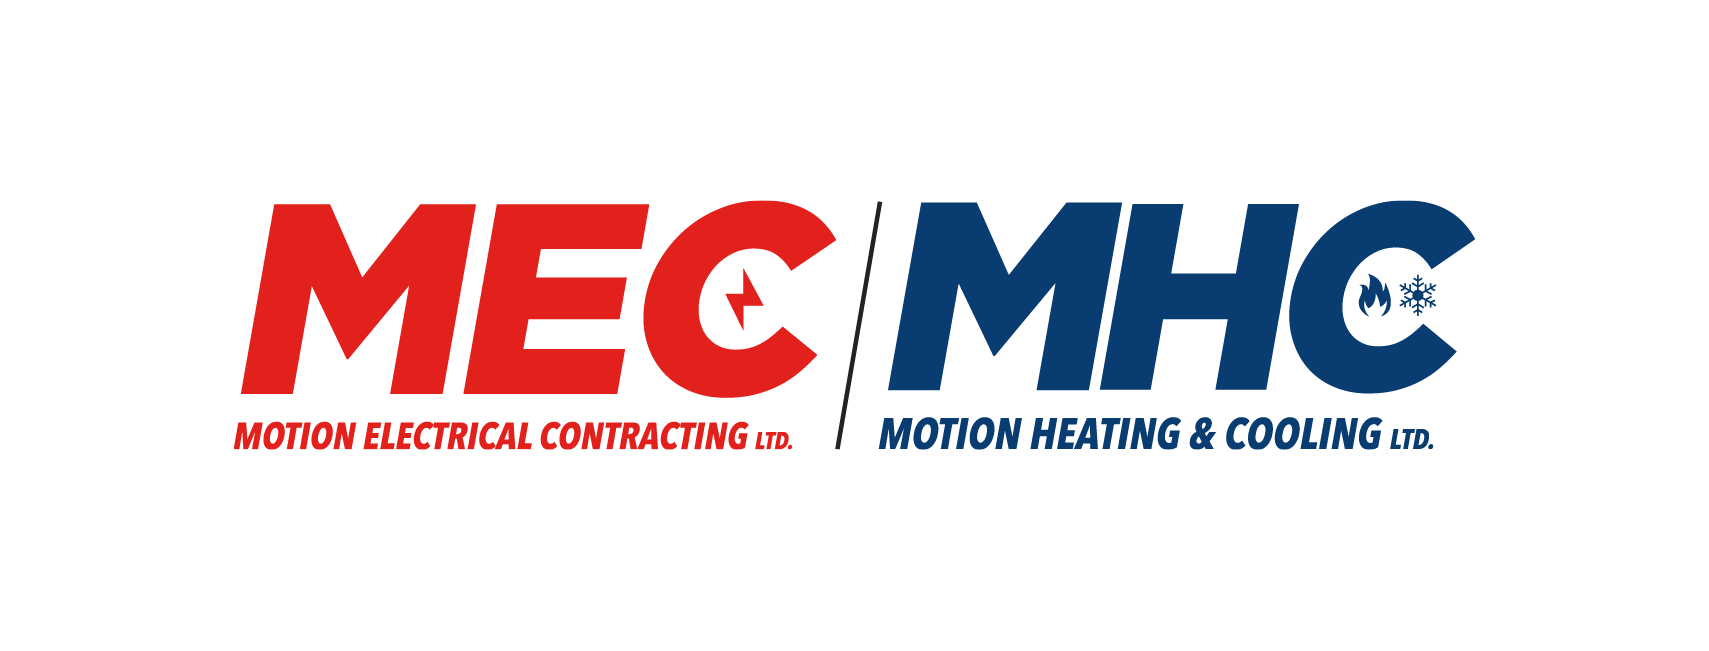 Motion Electrical/Heating & Cooling